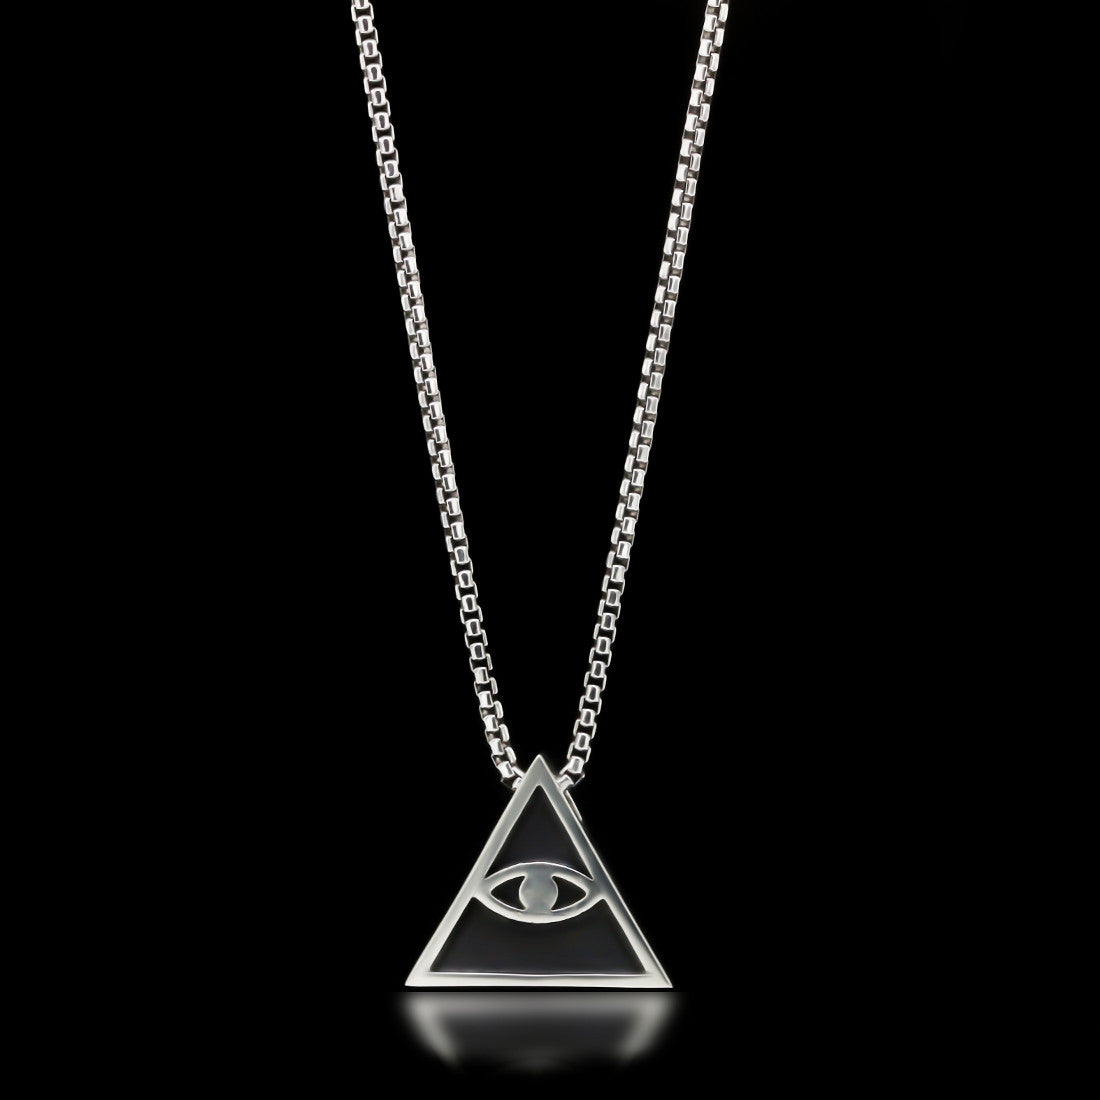 All Seeing Eye Slider Necklace - Sterling Silver - Twisted Love NYC